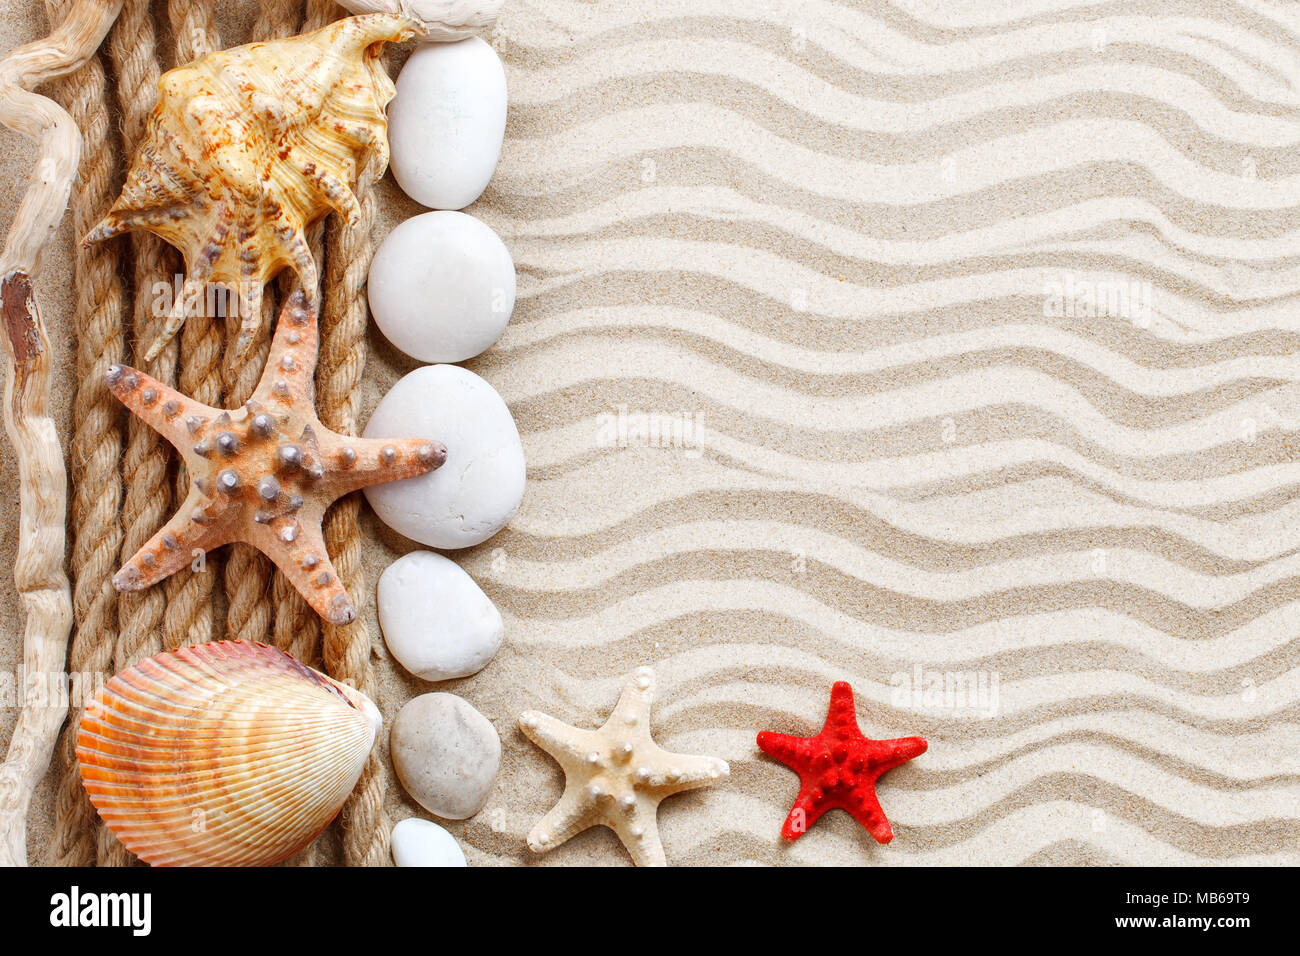 Starfish, seashells, sea stones and palm leaves lying on the sea sand . There is a place for labels. Stock Photo